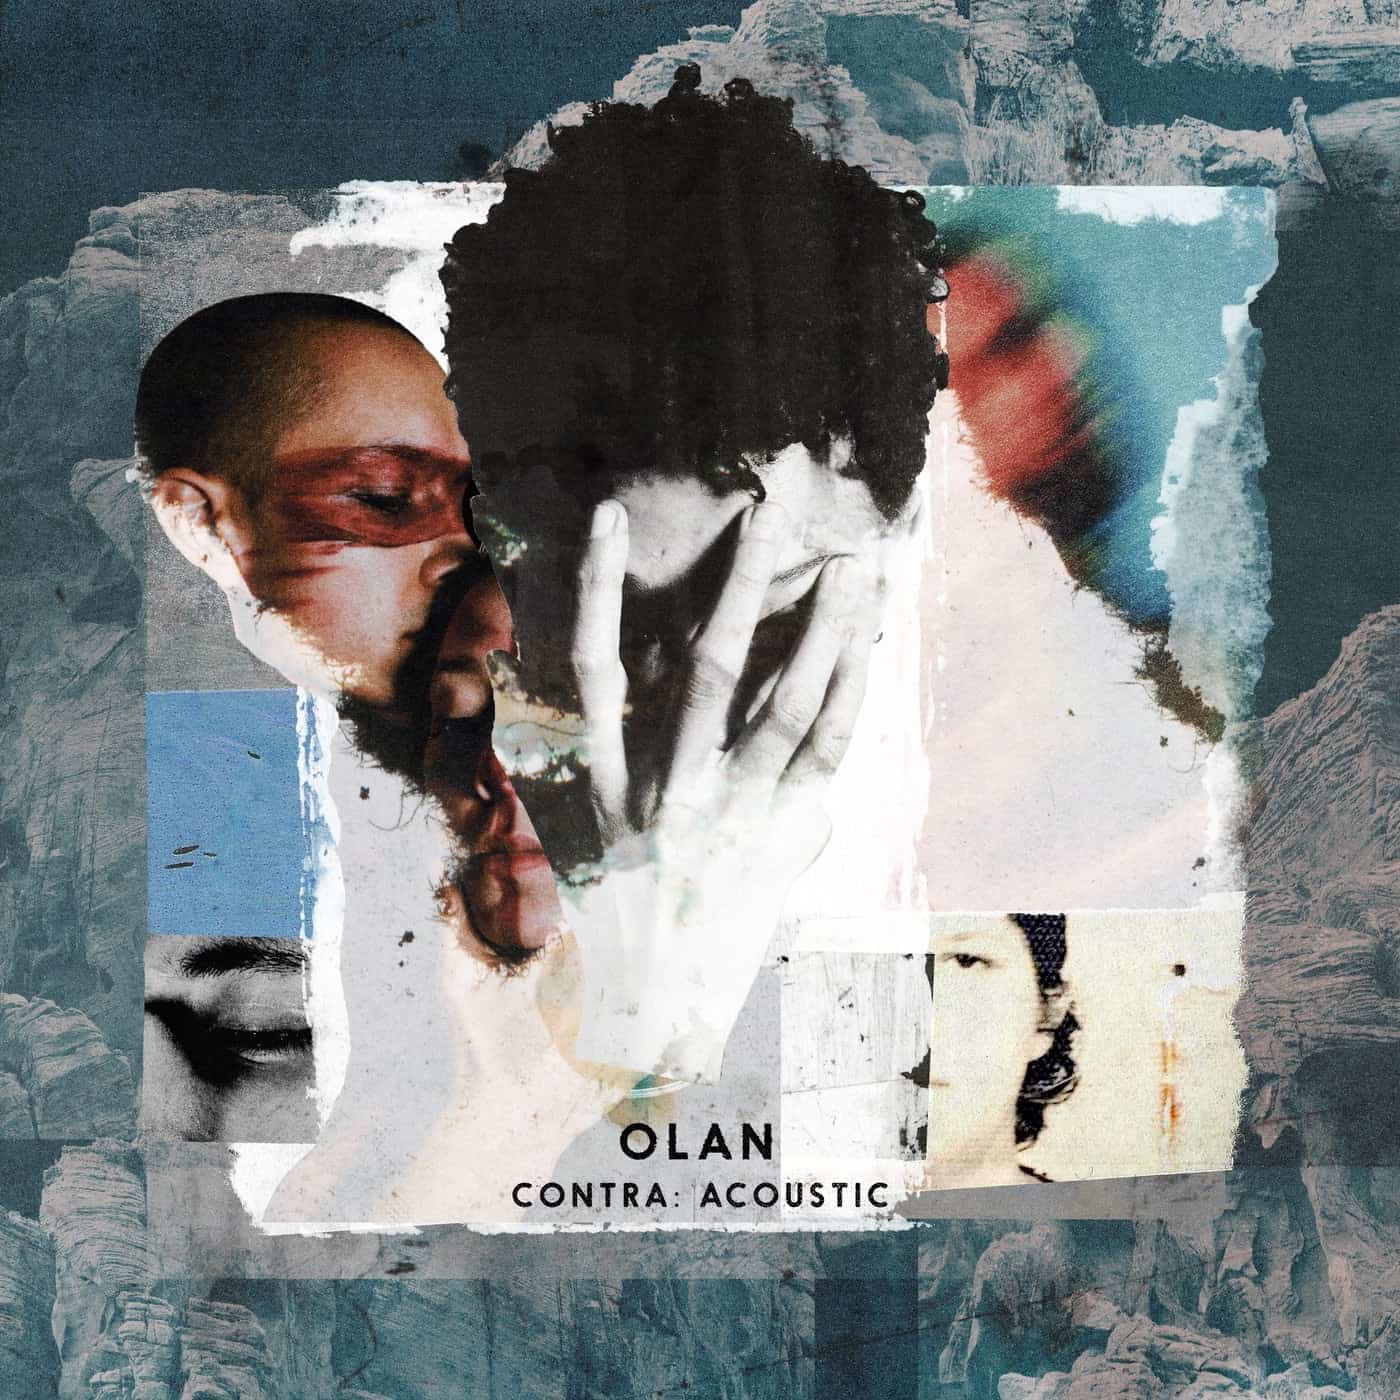 Download OLAN - Contra: Acoustic on Electrobuzz